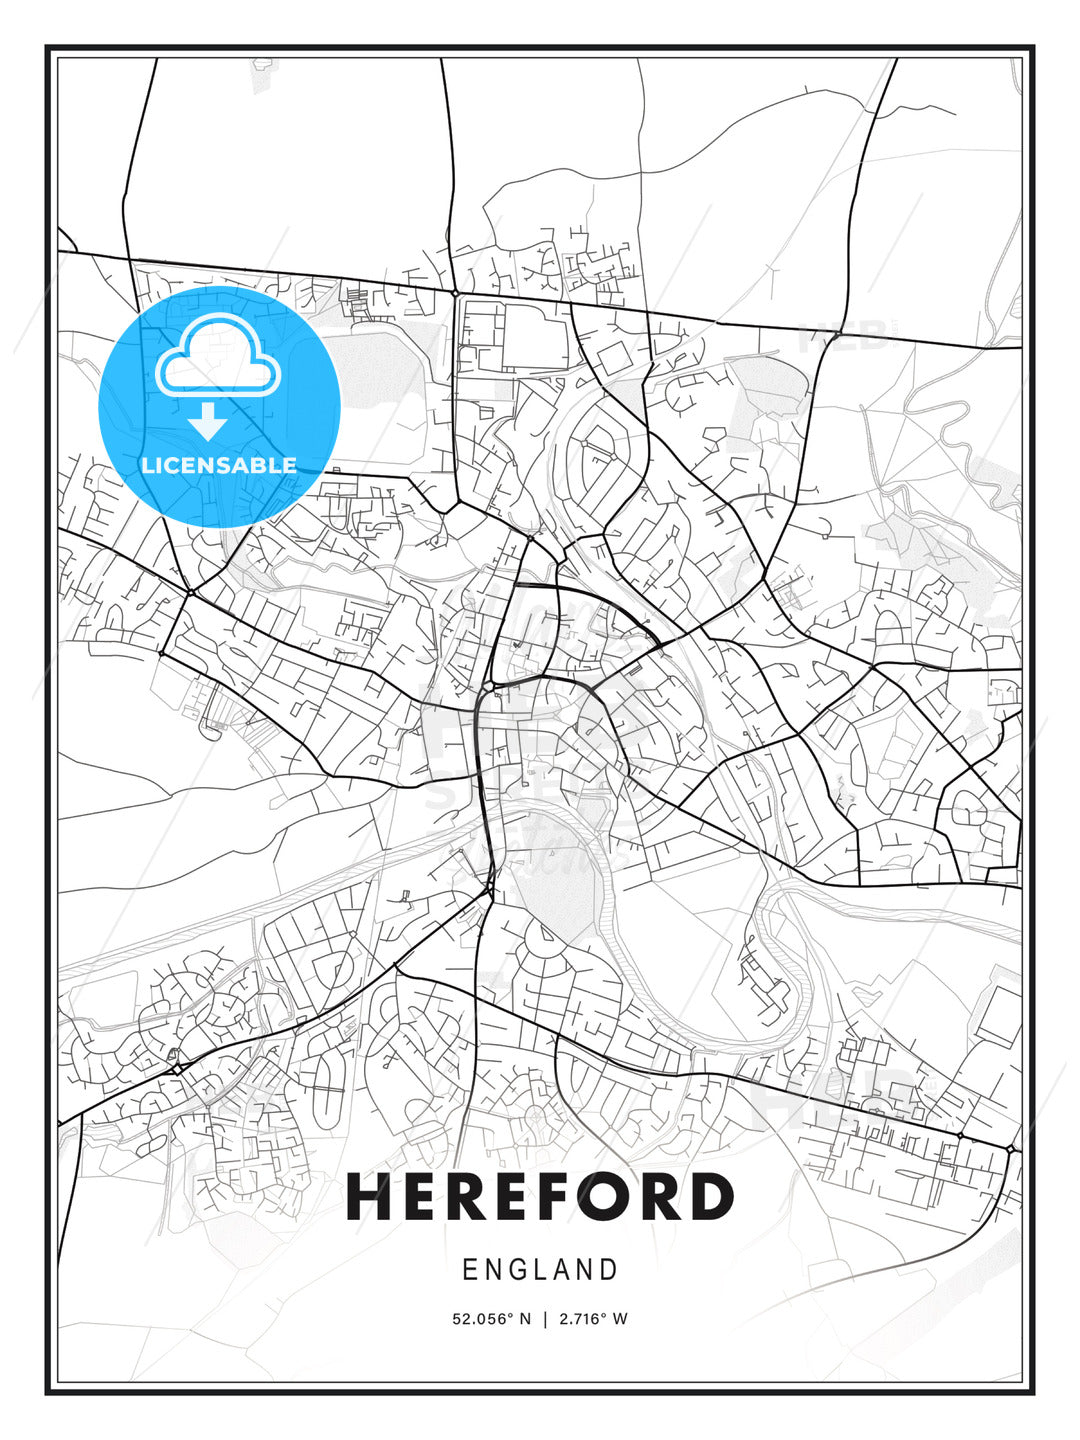 Hereford, England, Modern Print Template in Various Formats - HEBSTREITS Sketches